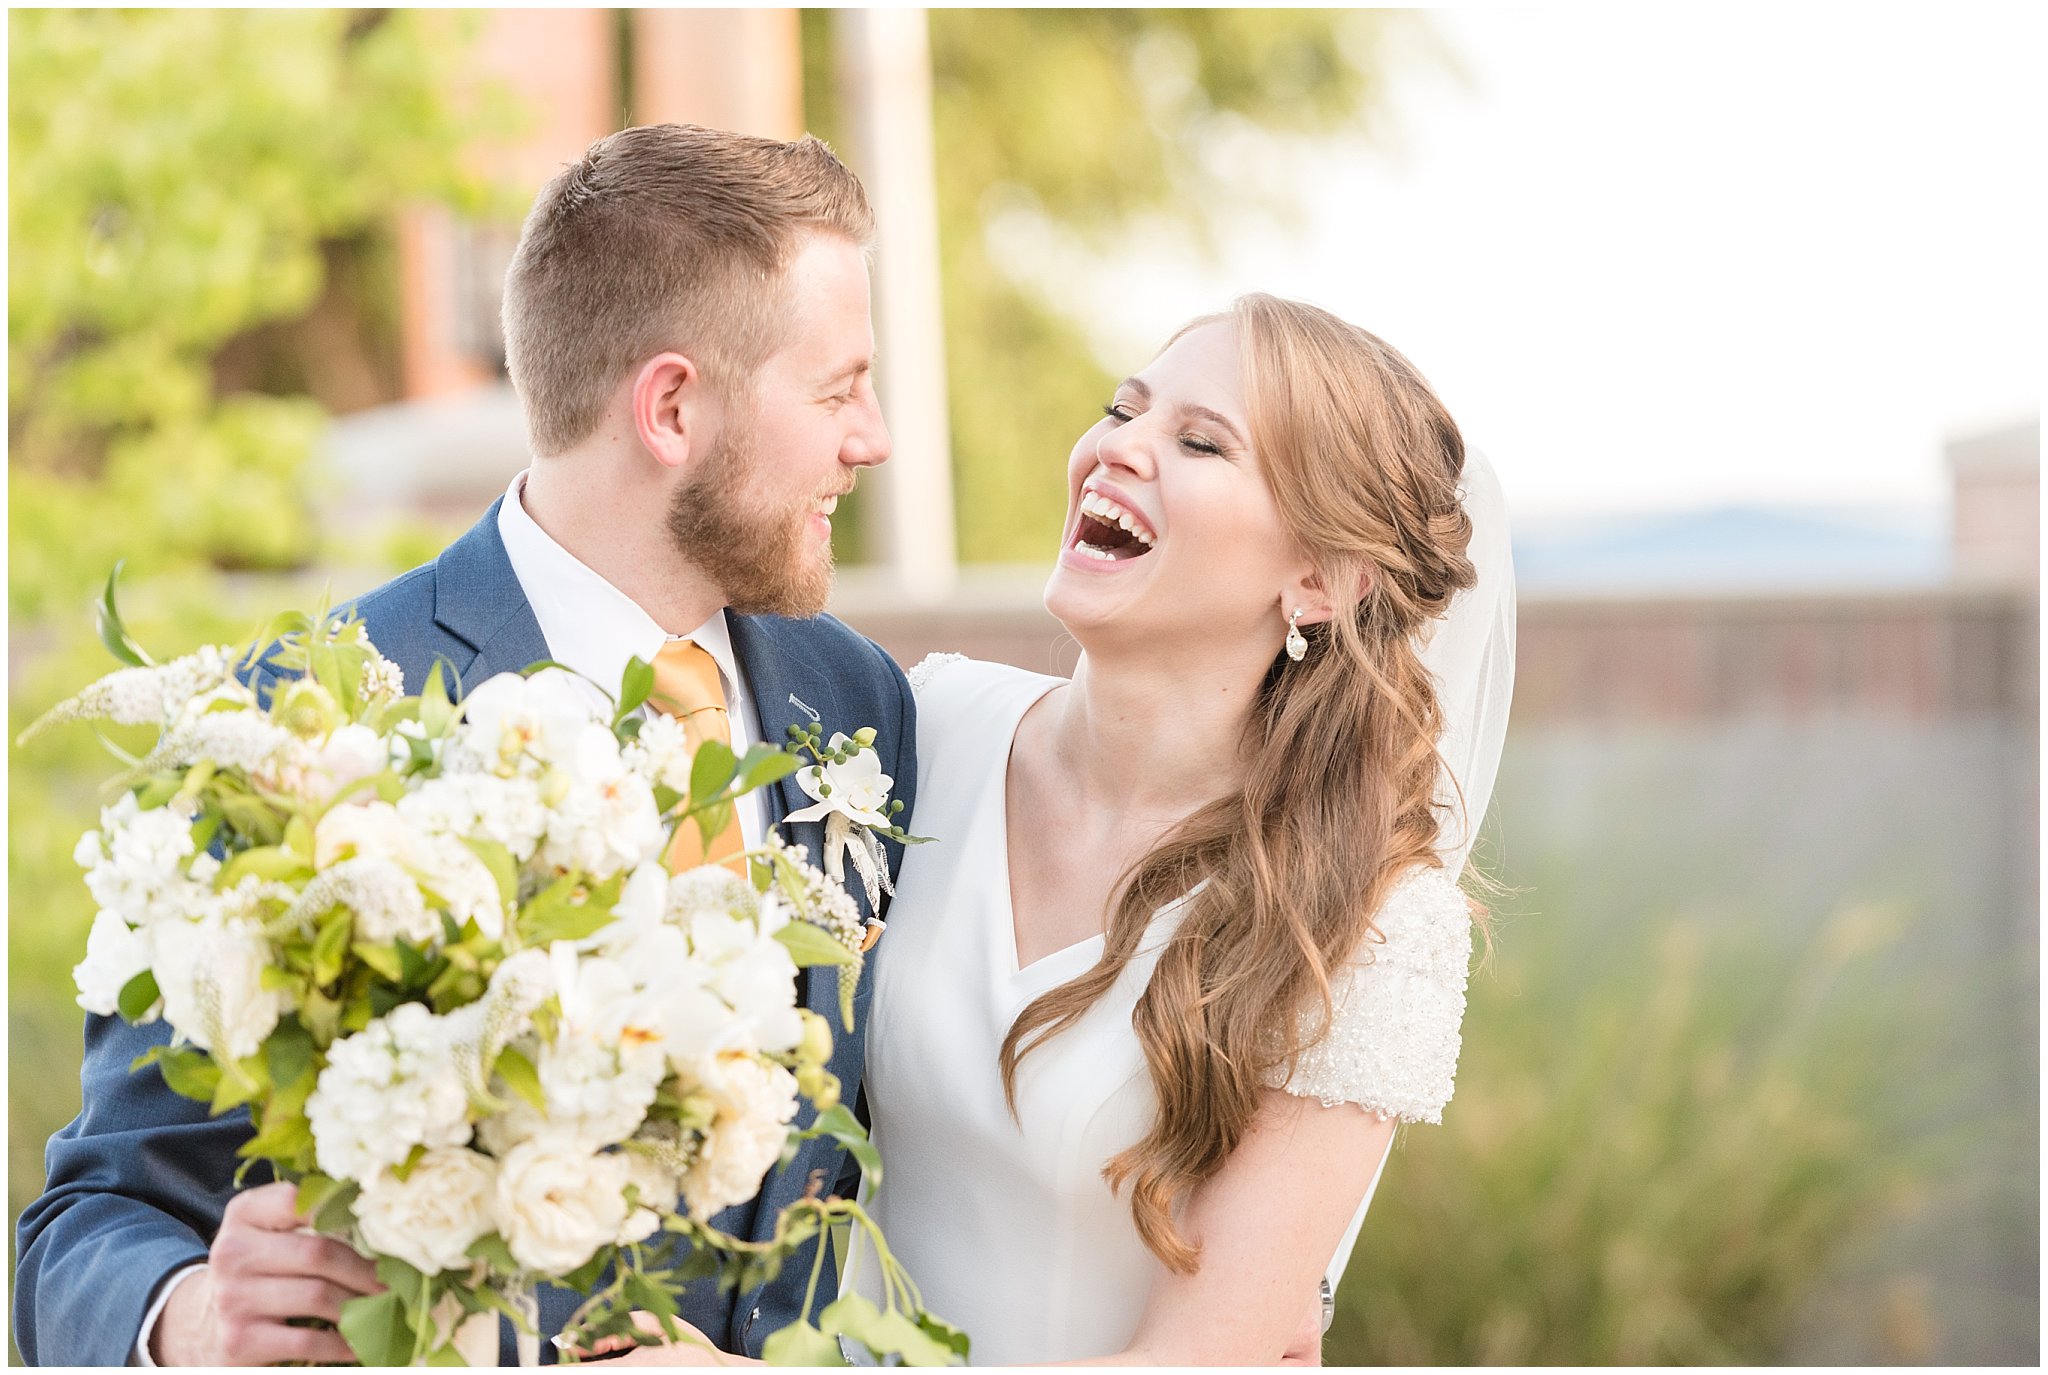 Bride and groom walking and laughing | gold, navy and white wedding | Talia Event Center | Utah Wedding Photography | Jessie and Dallin Photography